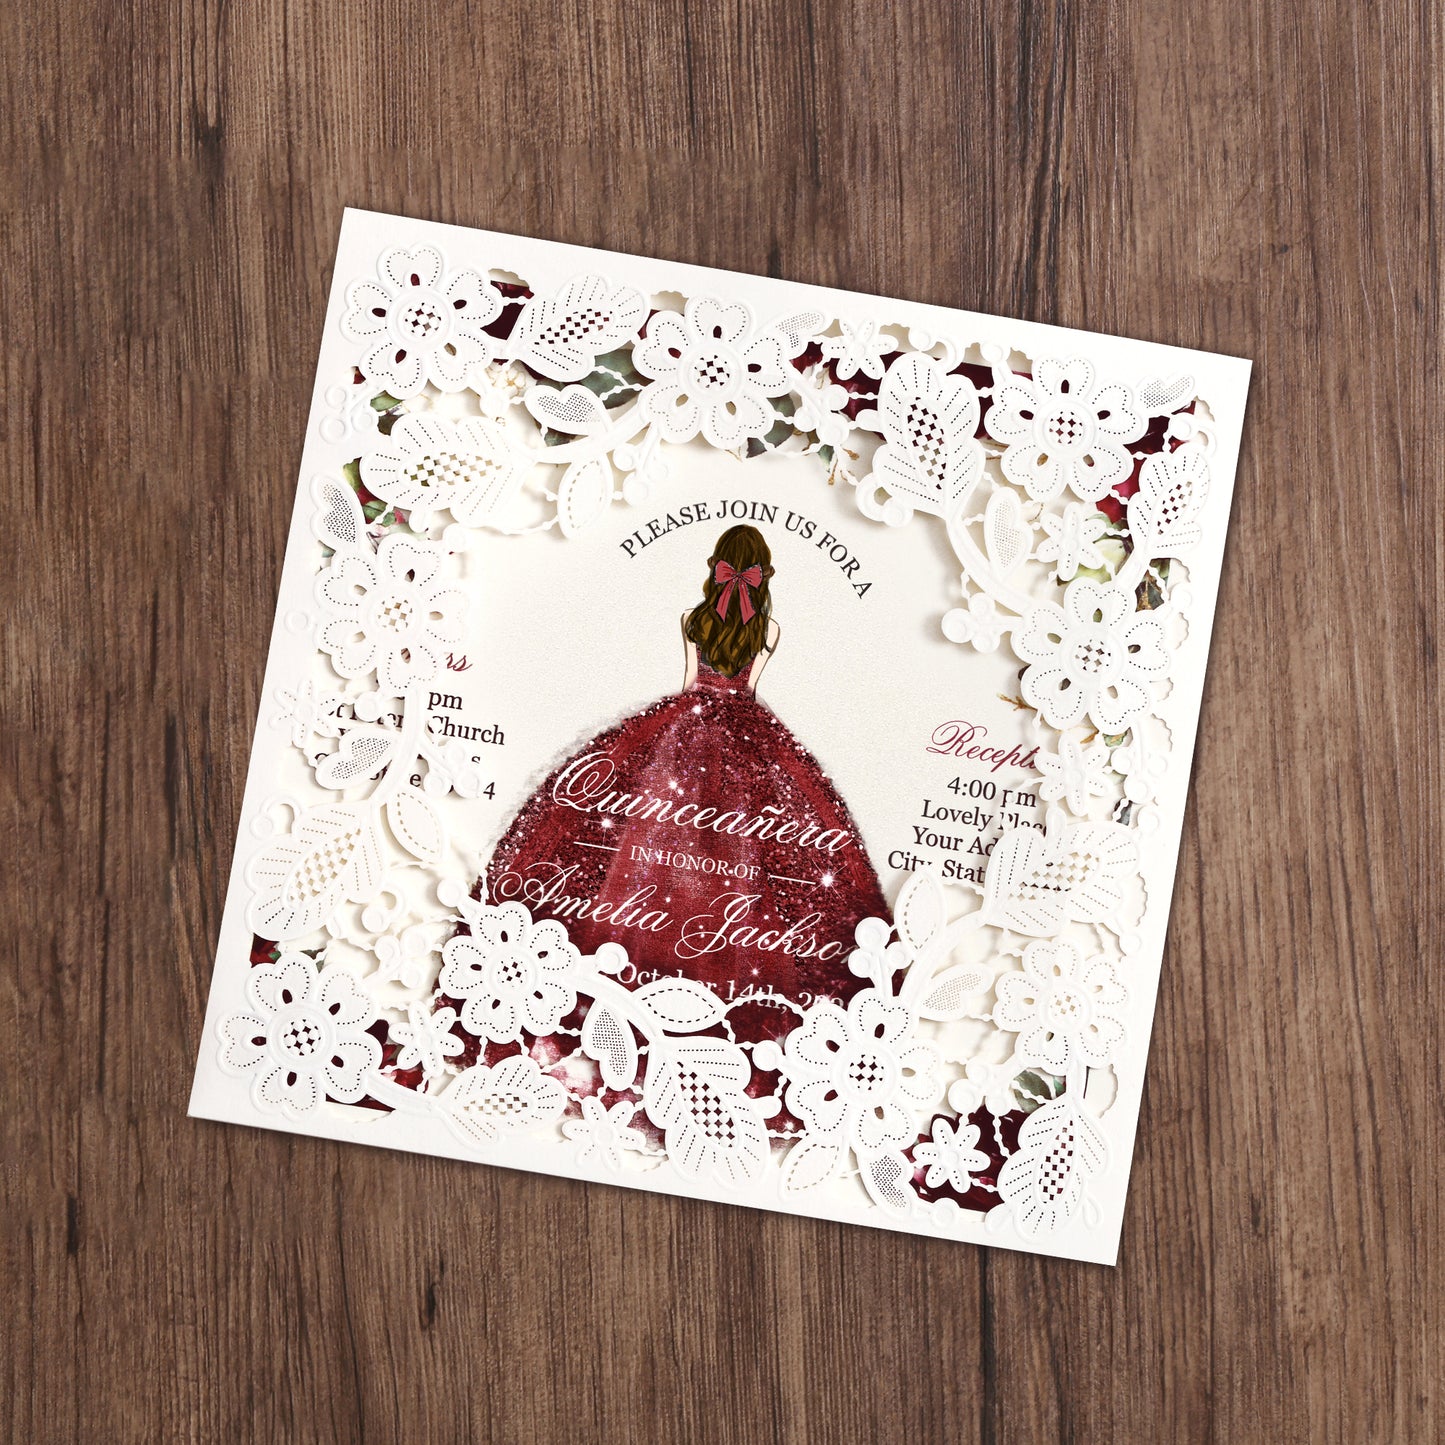 Customized Quinceanera Invitation Burgundy, Elegant 15 years Invitations Sweet 16, Miss XV, Birthday Laser Cut Quince Invitation Cards White Personalized